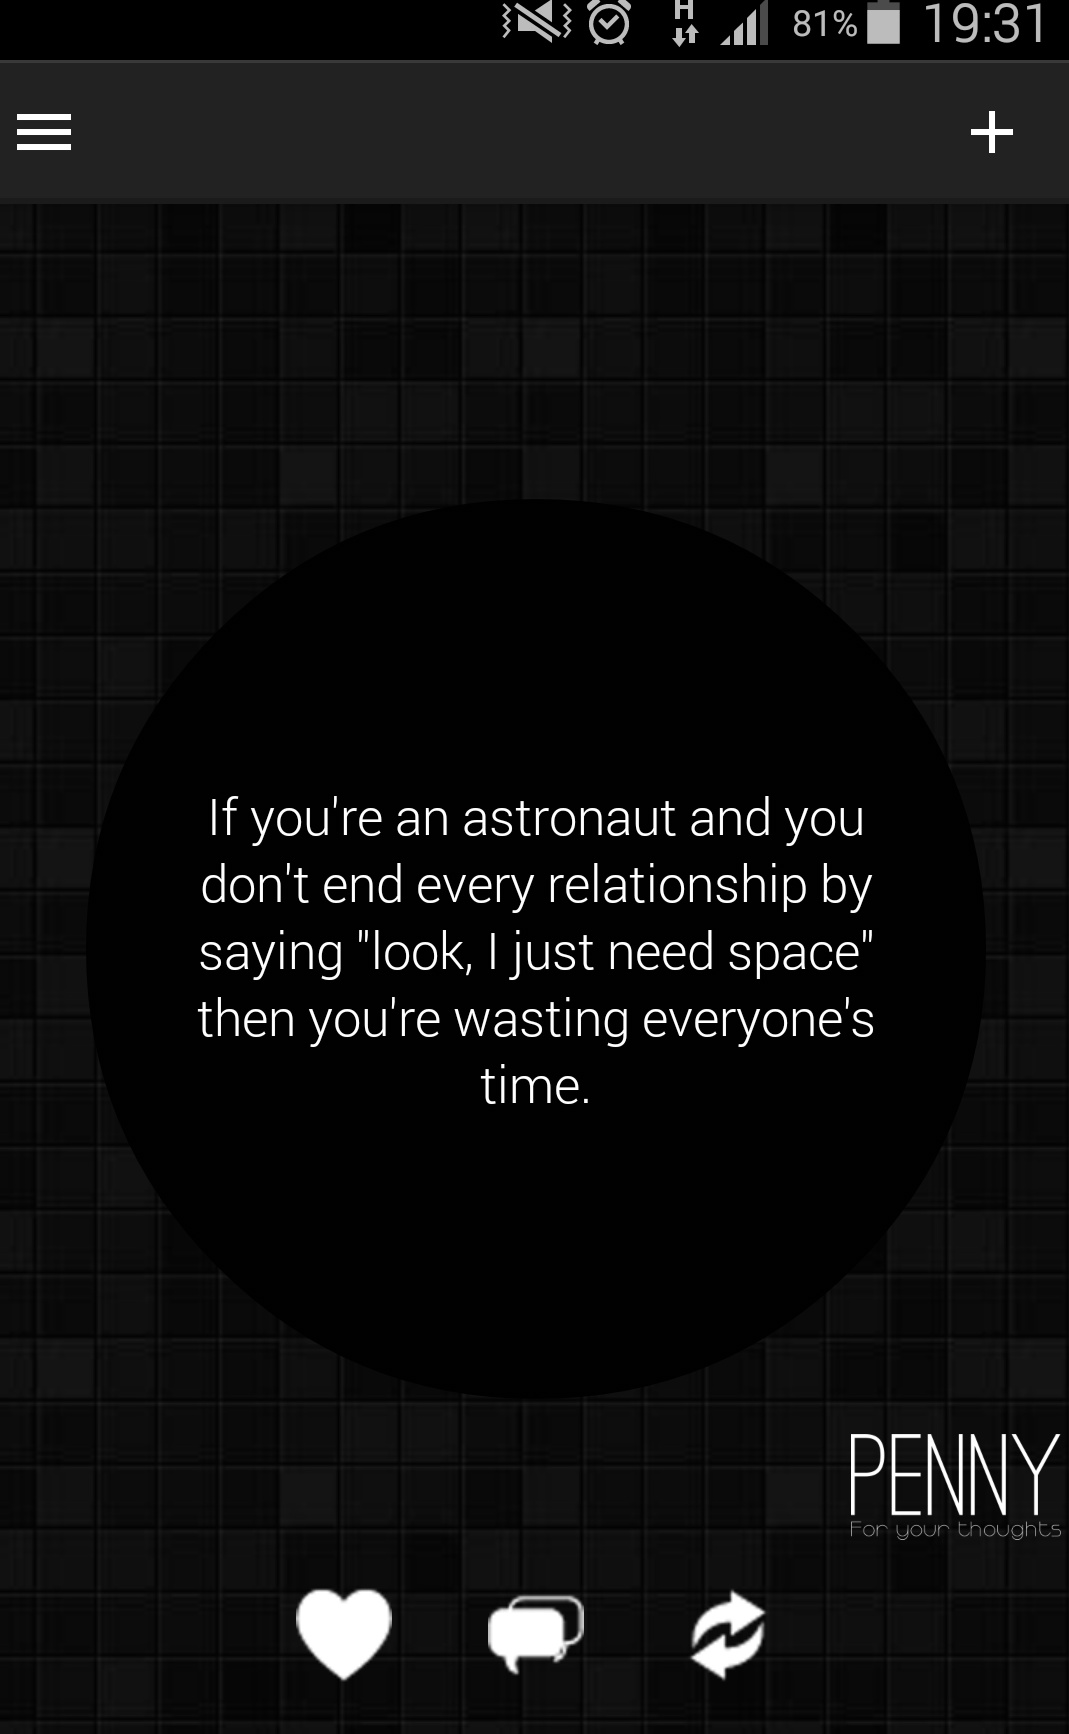 If you're an astronaut